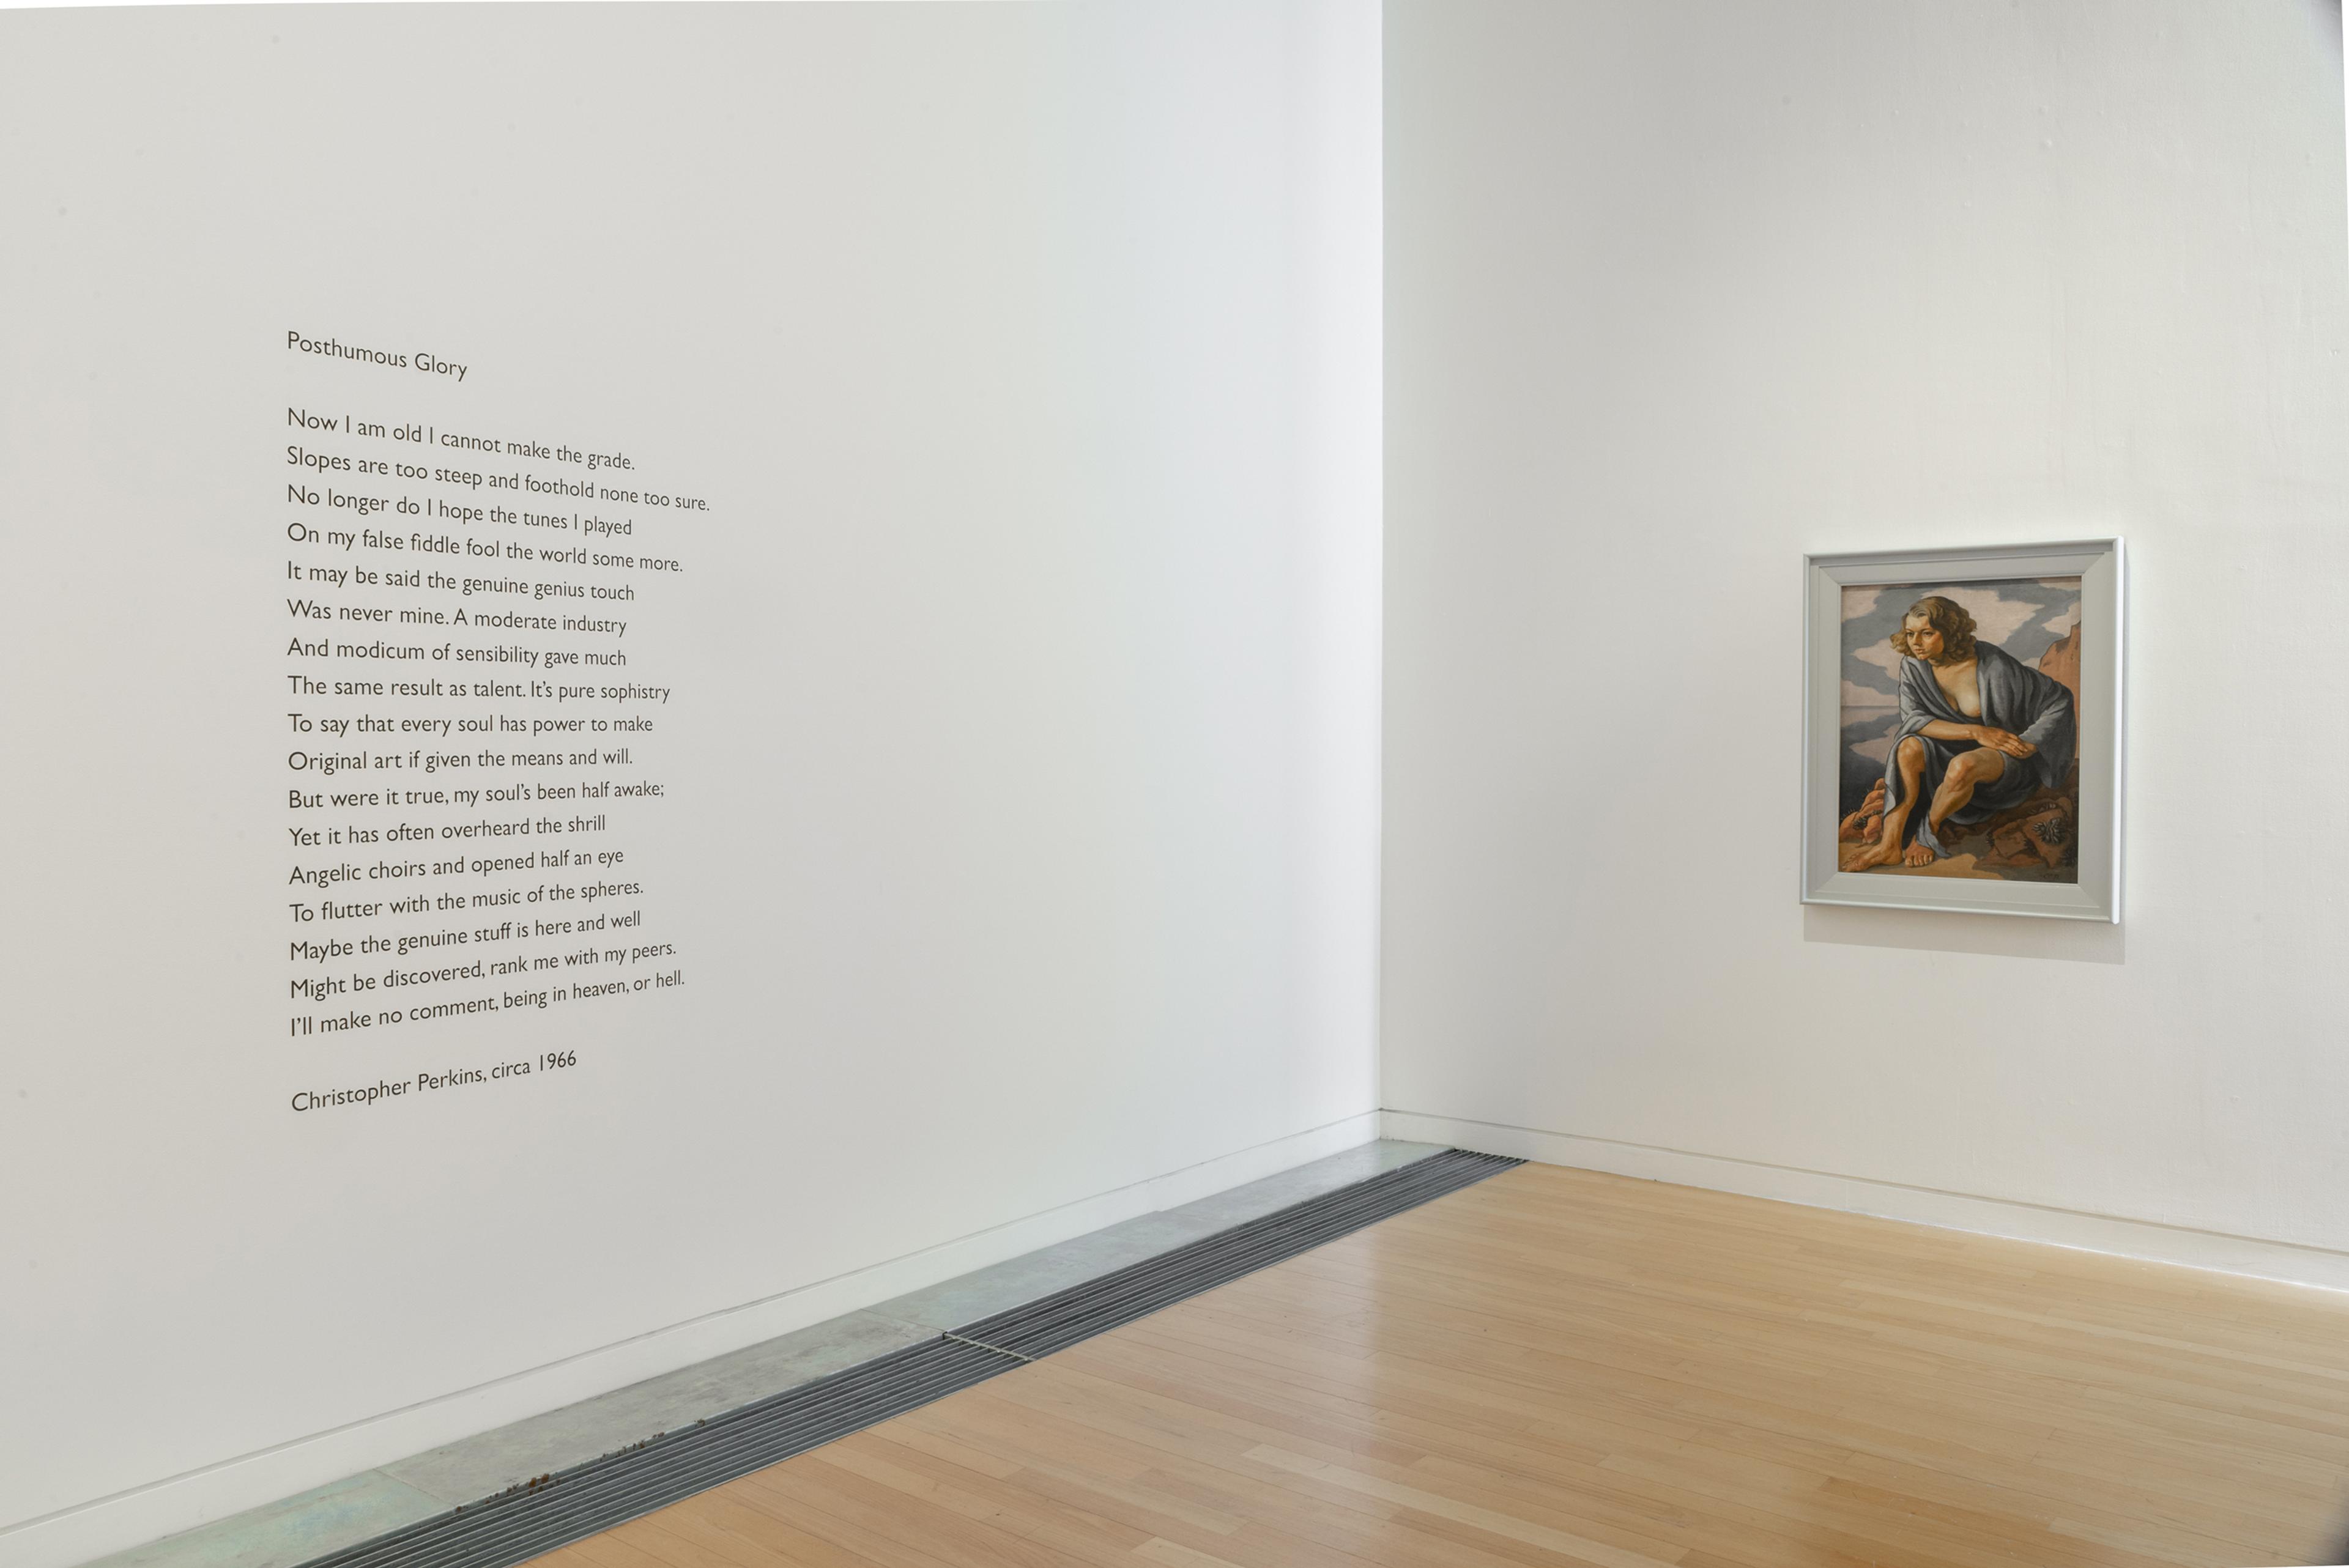 Christopher Perkins, Meditation, 1931, oil on canvas, Collection of Auckland Art Gallery Toi o Tamaki, purchased 1967. Installation view, ‘Looking for a new country’ – Christopher Perkins in New Zealand, Adam Art Gallery Te Pātaka Toi, Victoria University of Wellington, 6 November 2019 – 22 March 2020. Photo: Shaun Matthews